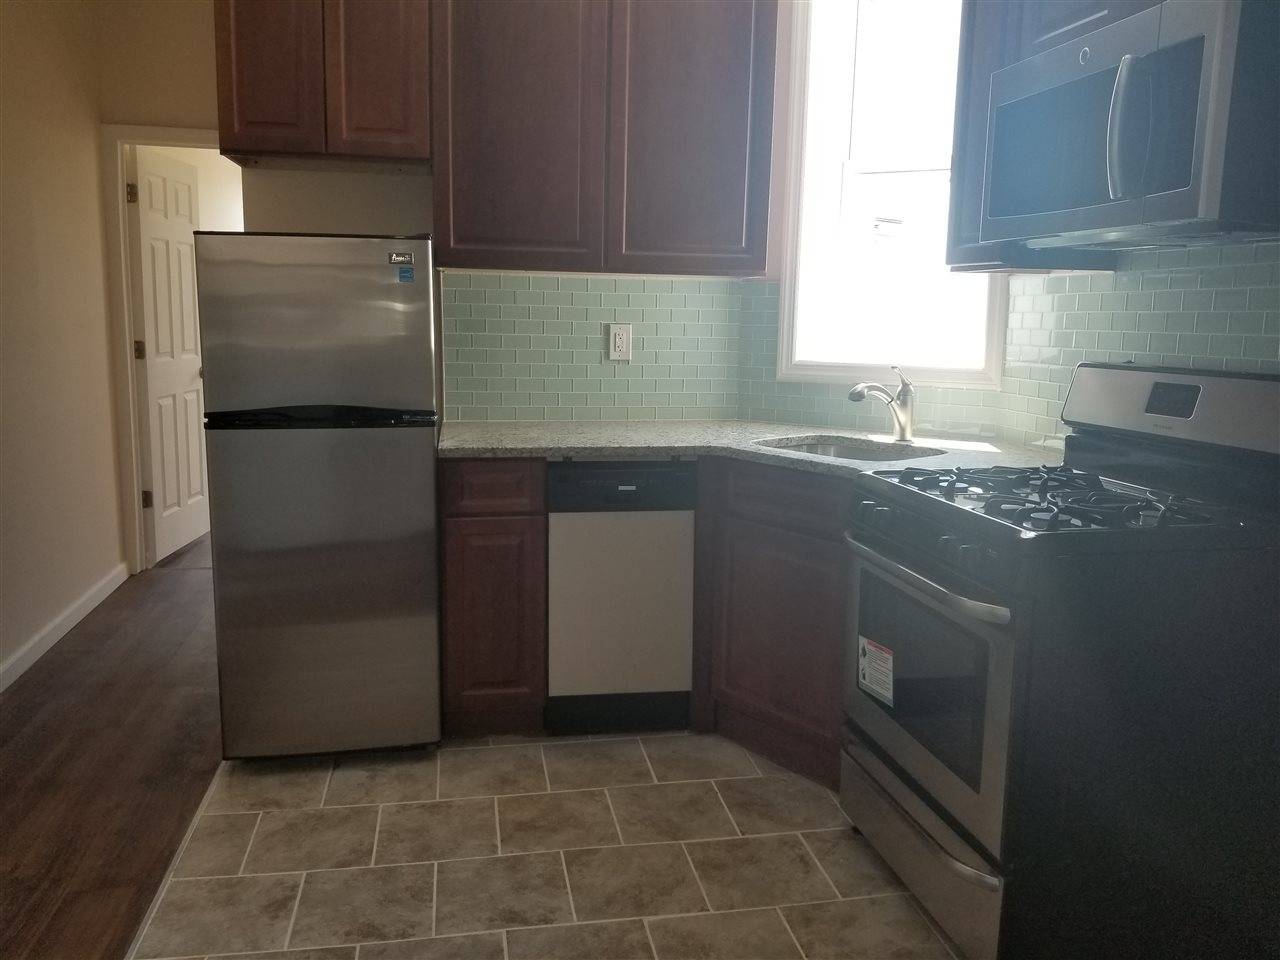 Come check out a newly renovated 2 bedroom 1 full bath apartment located on the third floor